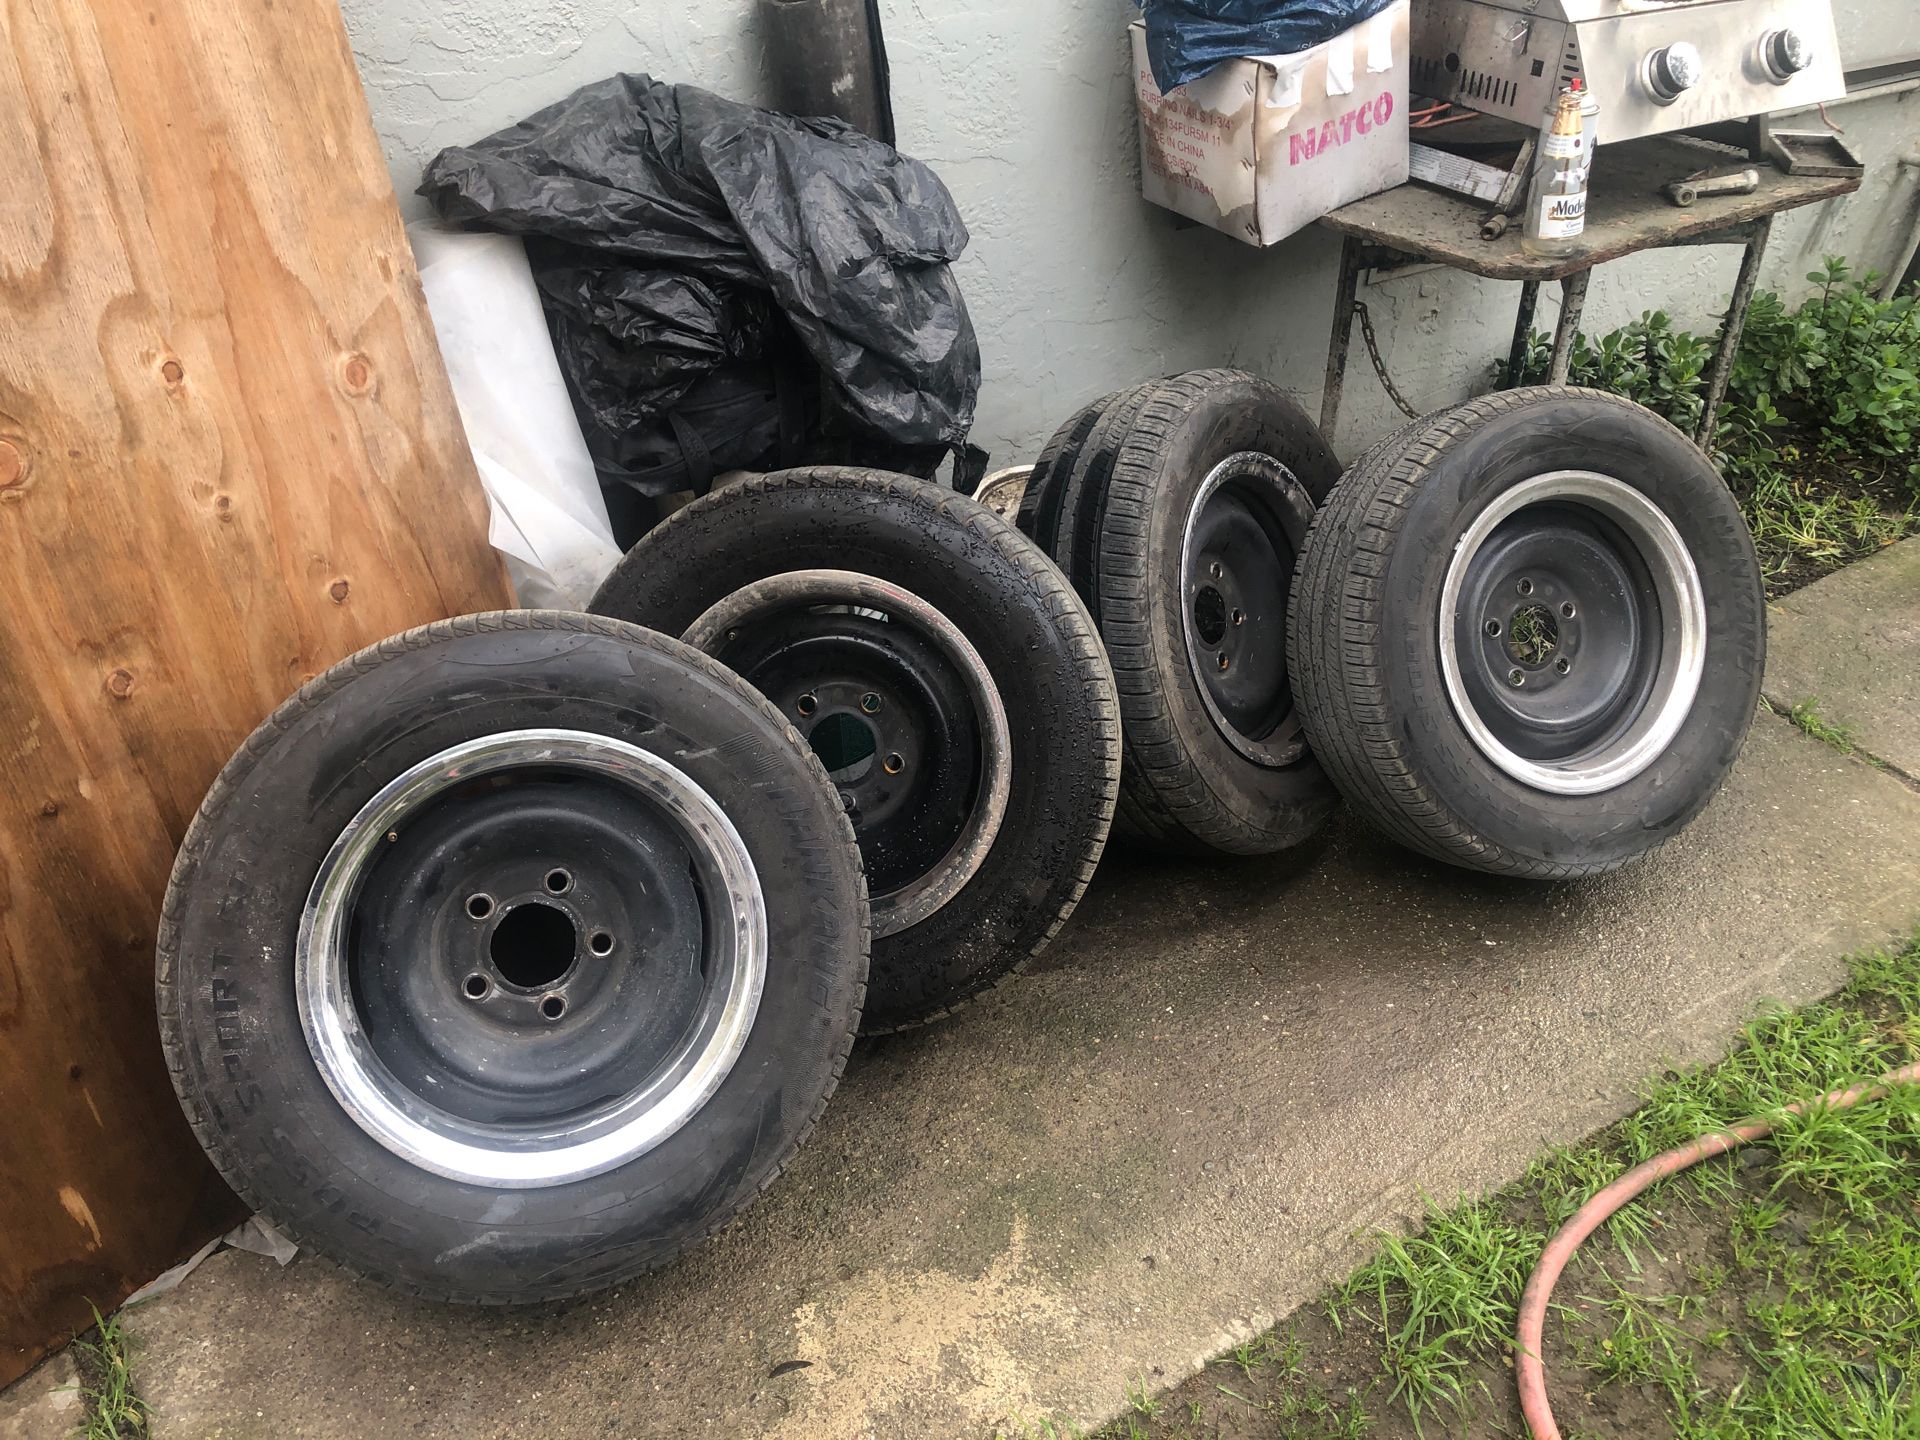 Chevy C1500 rims 5x5 225/60r15 tires have like 25% life